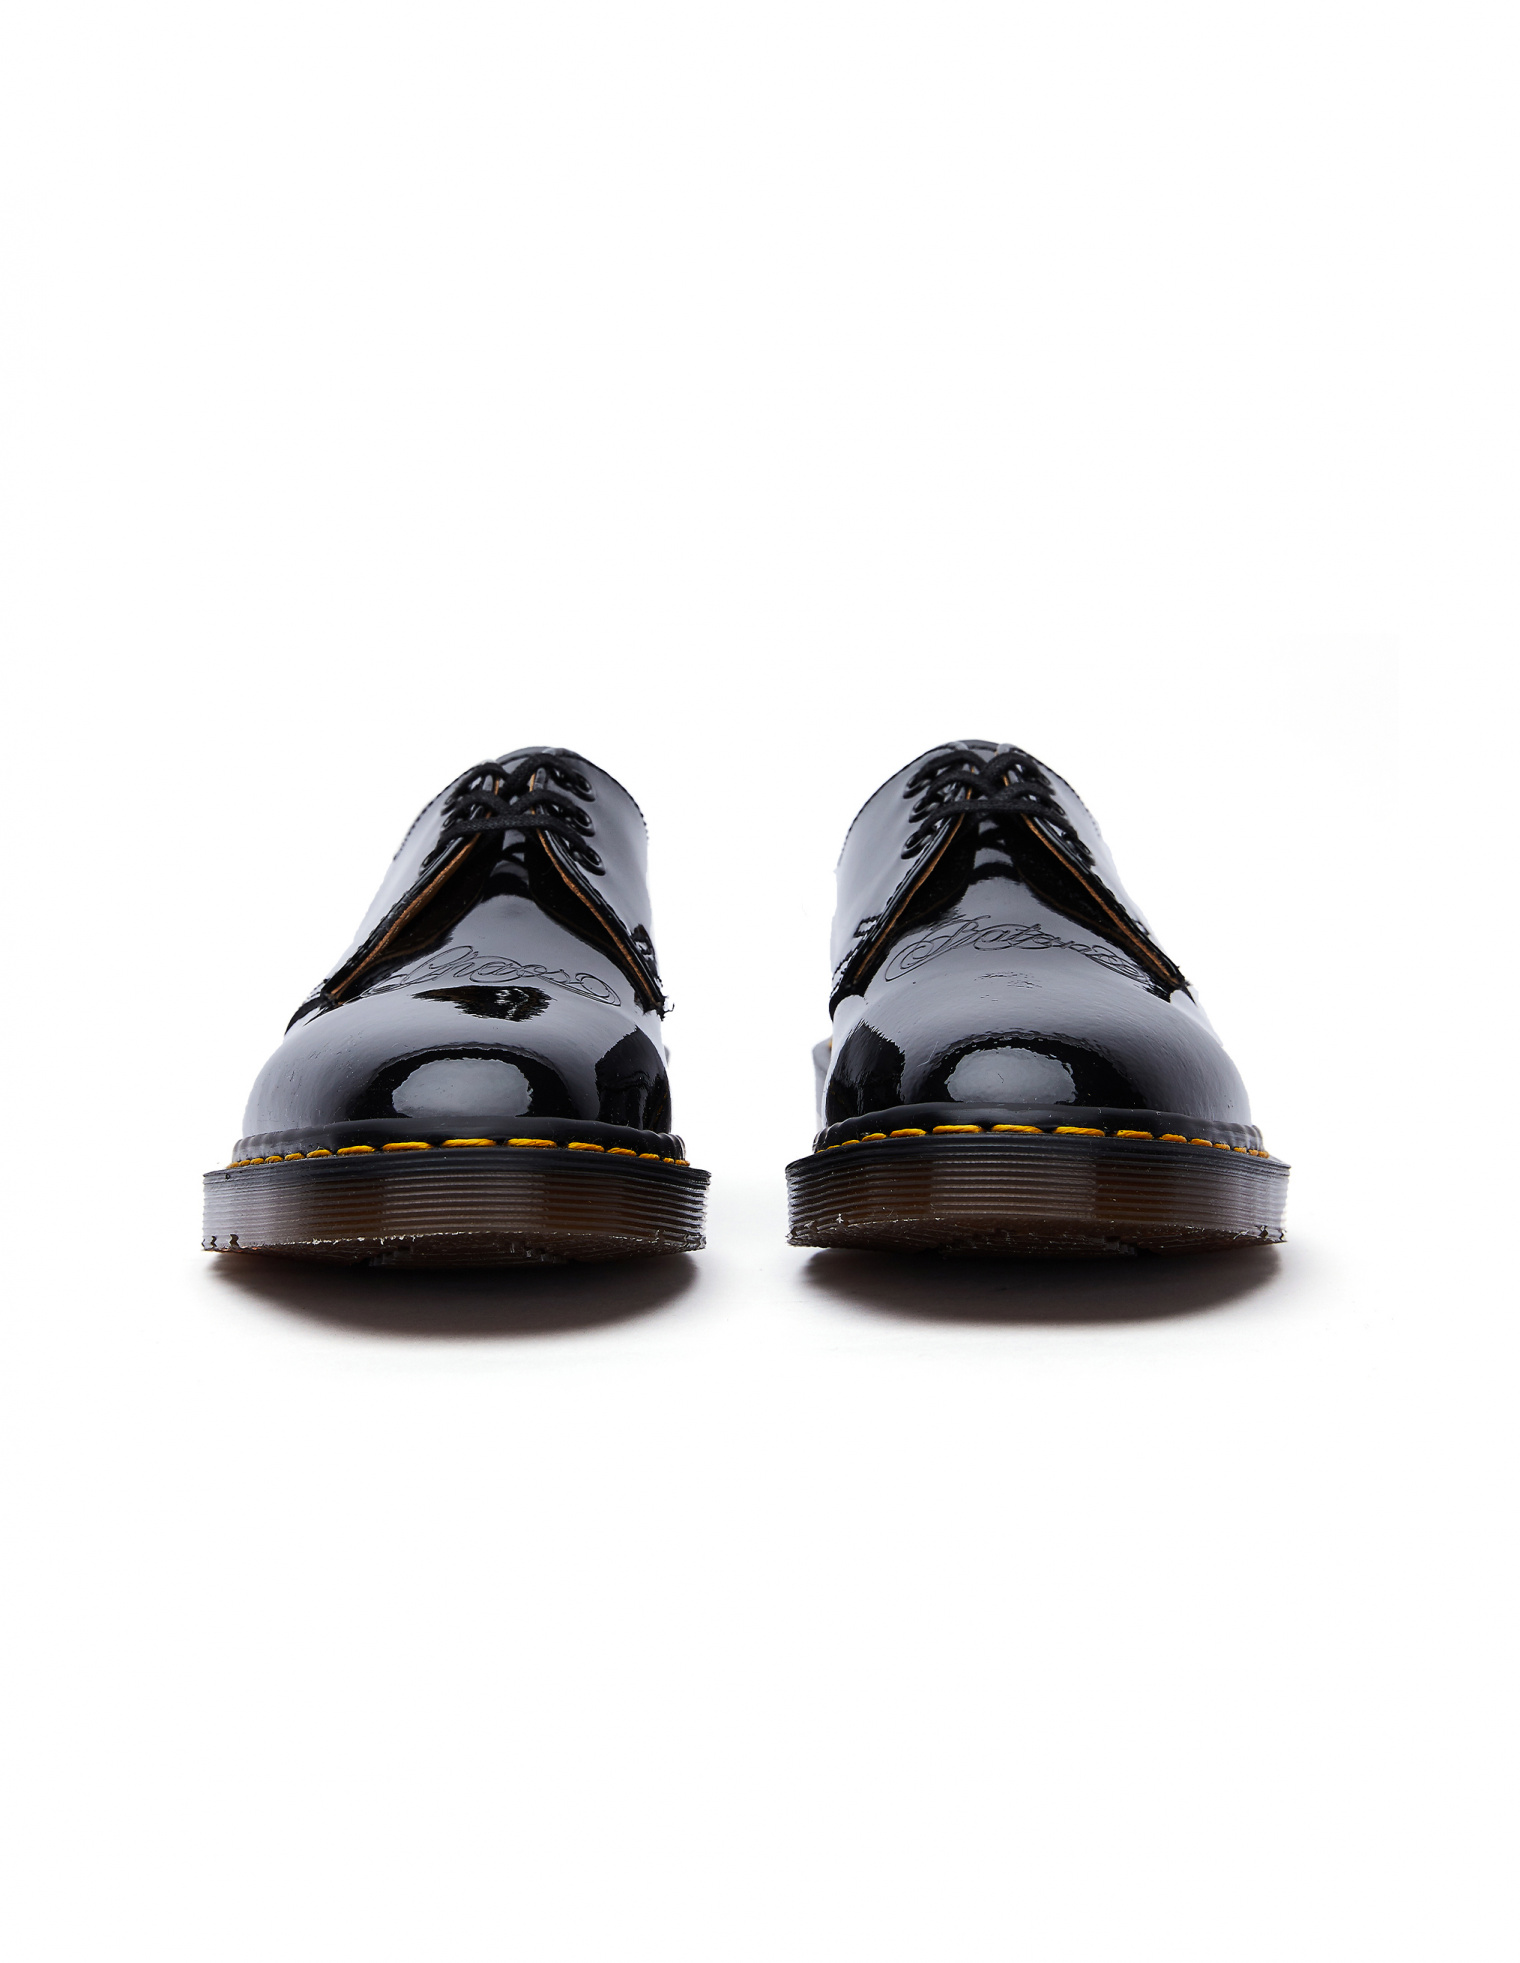 Undercover Dr.Martens Black Patent Leather 1461 Boots